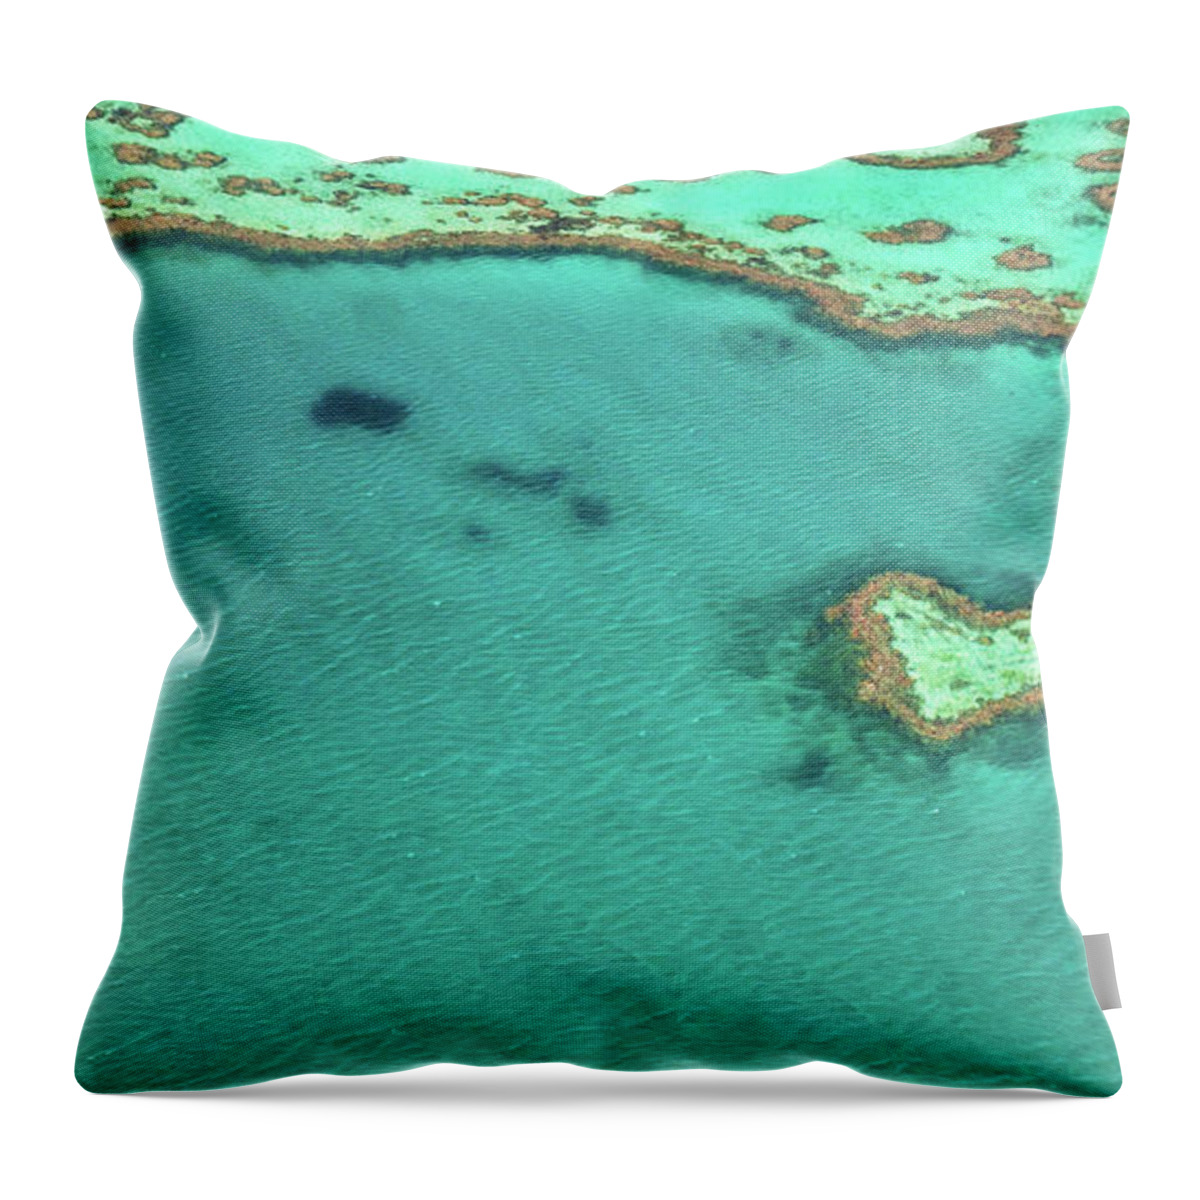 Scenics Throw Pillow featuring the photograph Heart Reef by Kokkai Ng